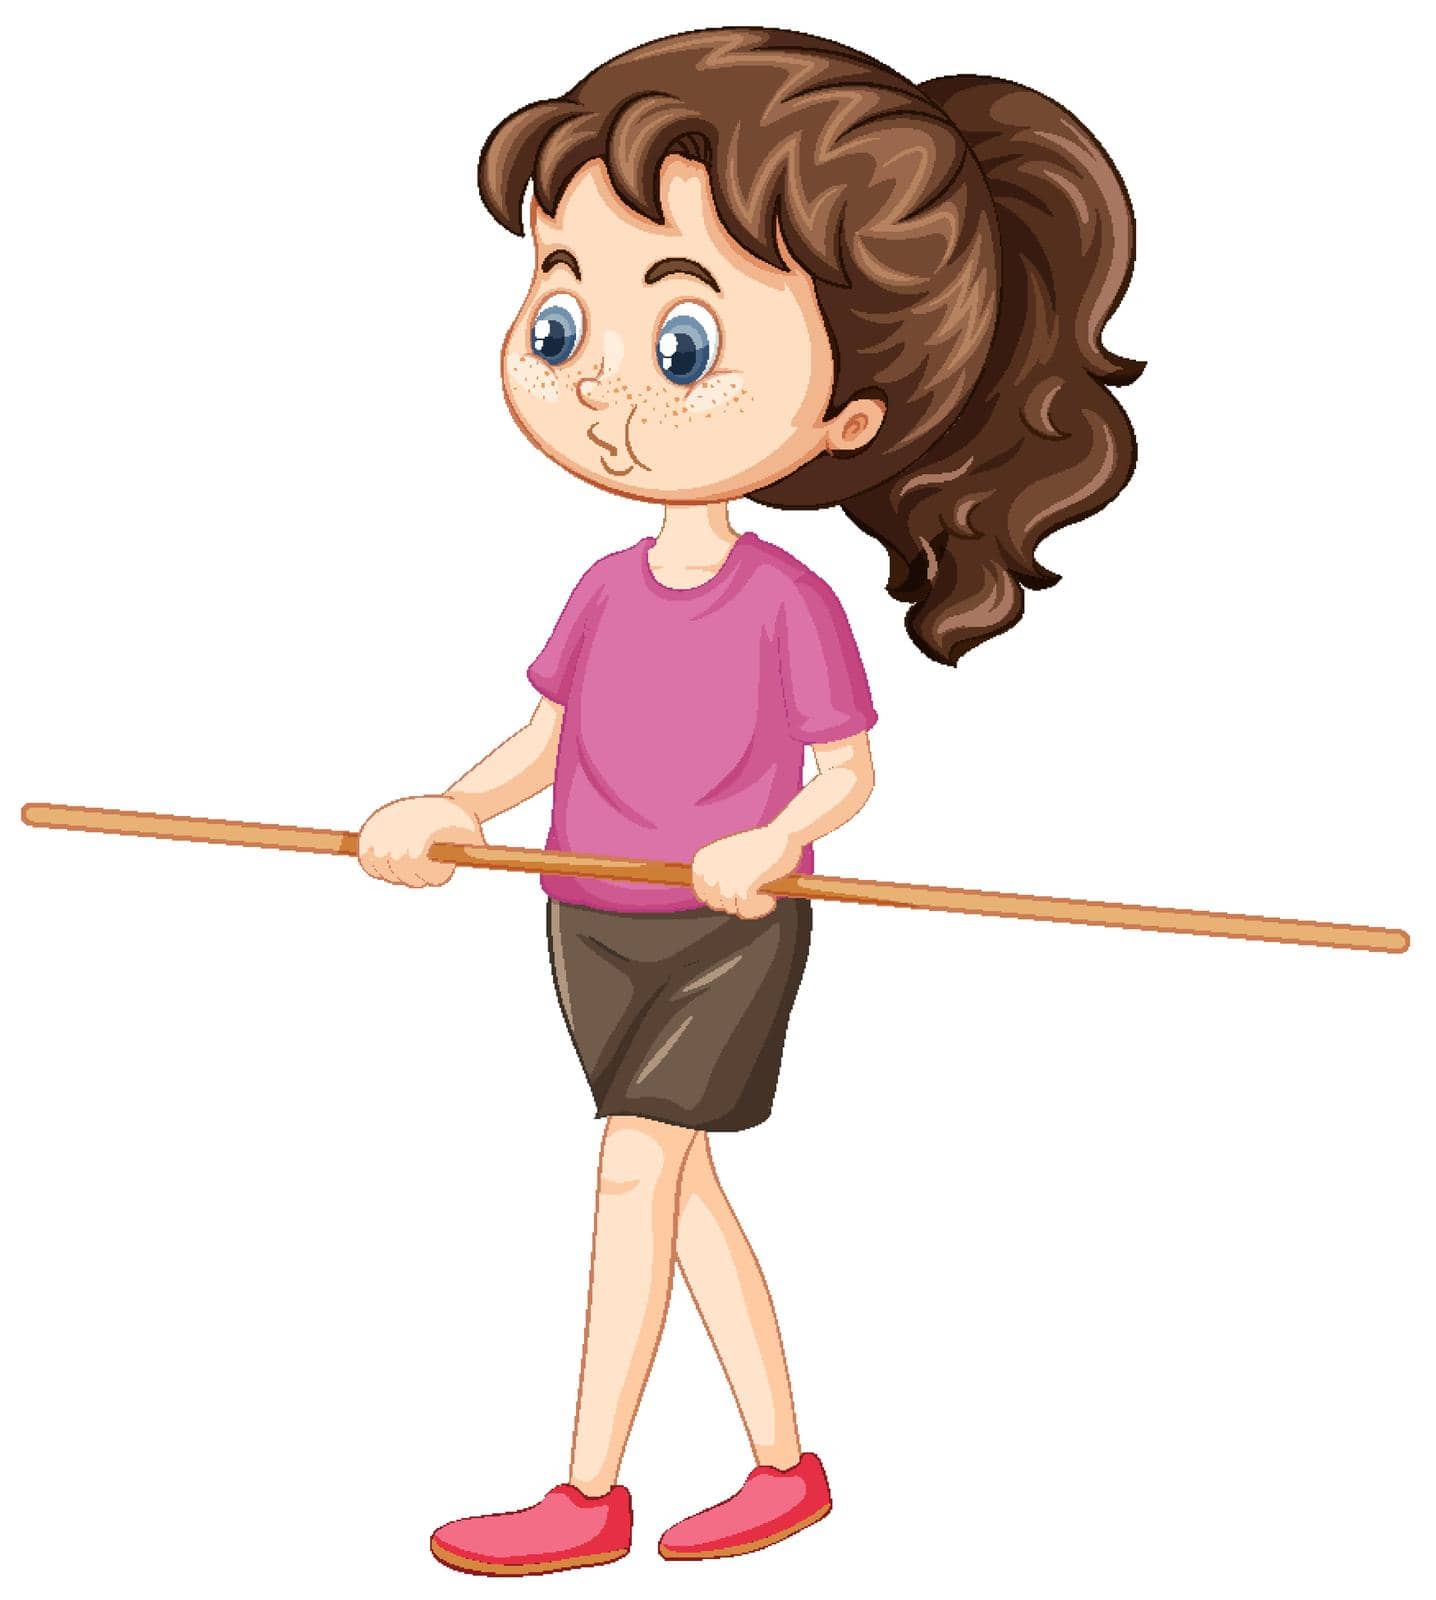 Cute girl standing and holding wooden handle by iimages